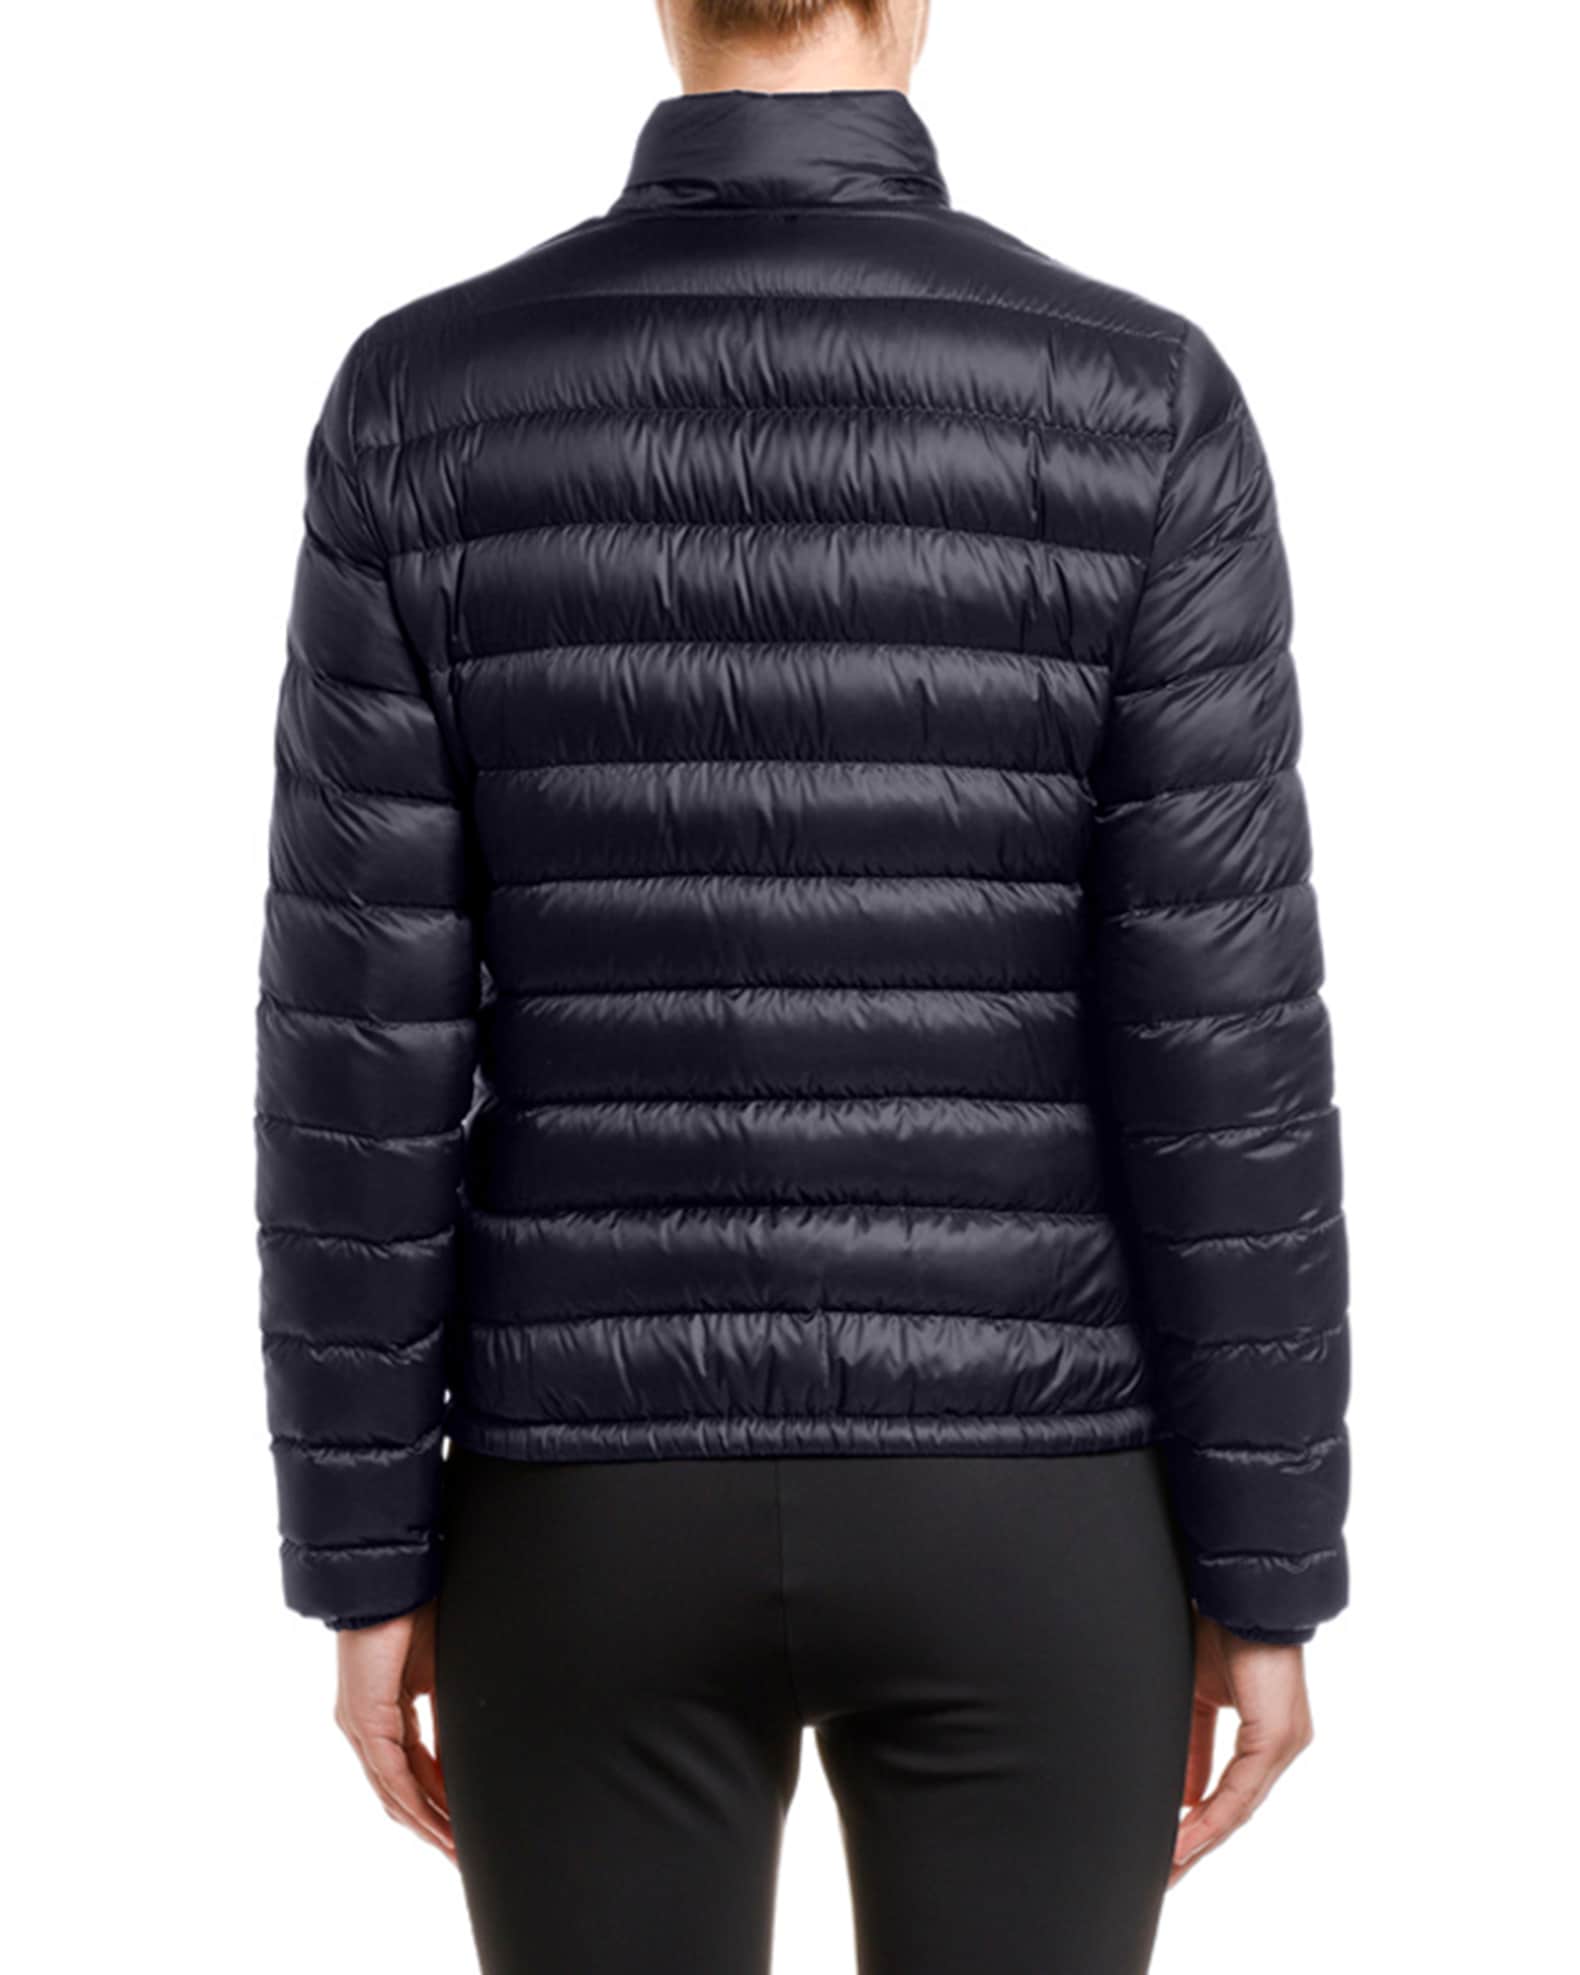 Moncler Lans Collared Down Jacket | Neiman Marcus